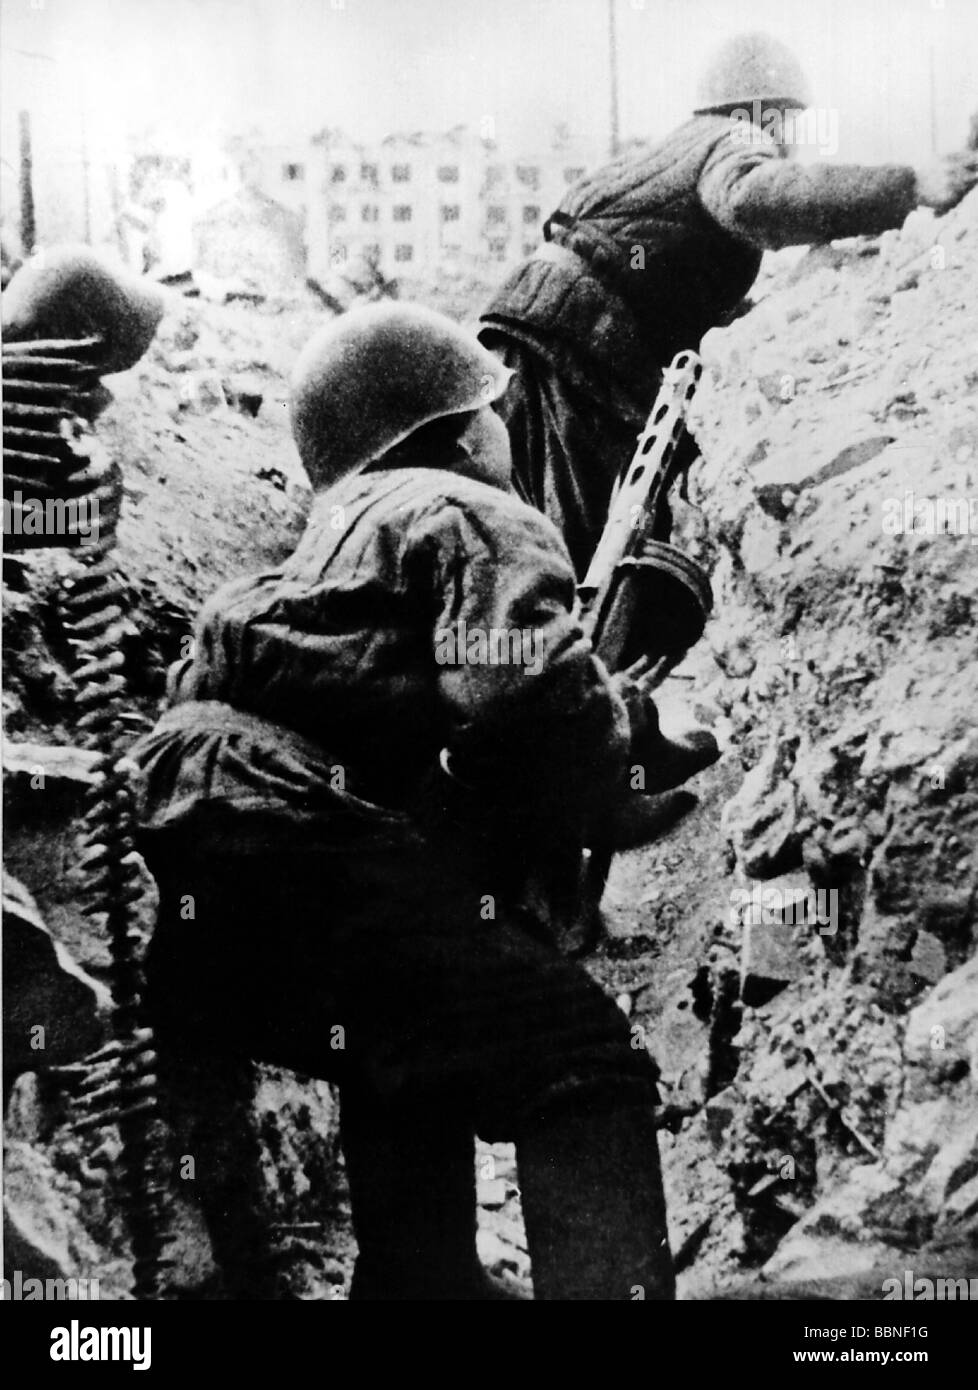 events, Second World War / WWII, Russia, Stalingrad 1942 / 1943, Soviet soldiers, in a dugout before an attack, weapons, arms, submachine gun, guns, PPSh 41, ammo belt, Russians, bandoleer, Soviets, USSR, trench, battle, fight, fighting, Soviet Union, Red Army, infantry, infantrymen, 20th century, historic, historical, Great Patriotic War, 1940s, people, Stock Photo